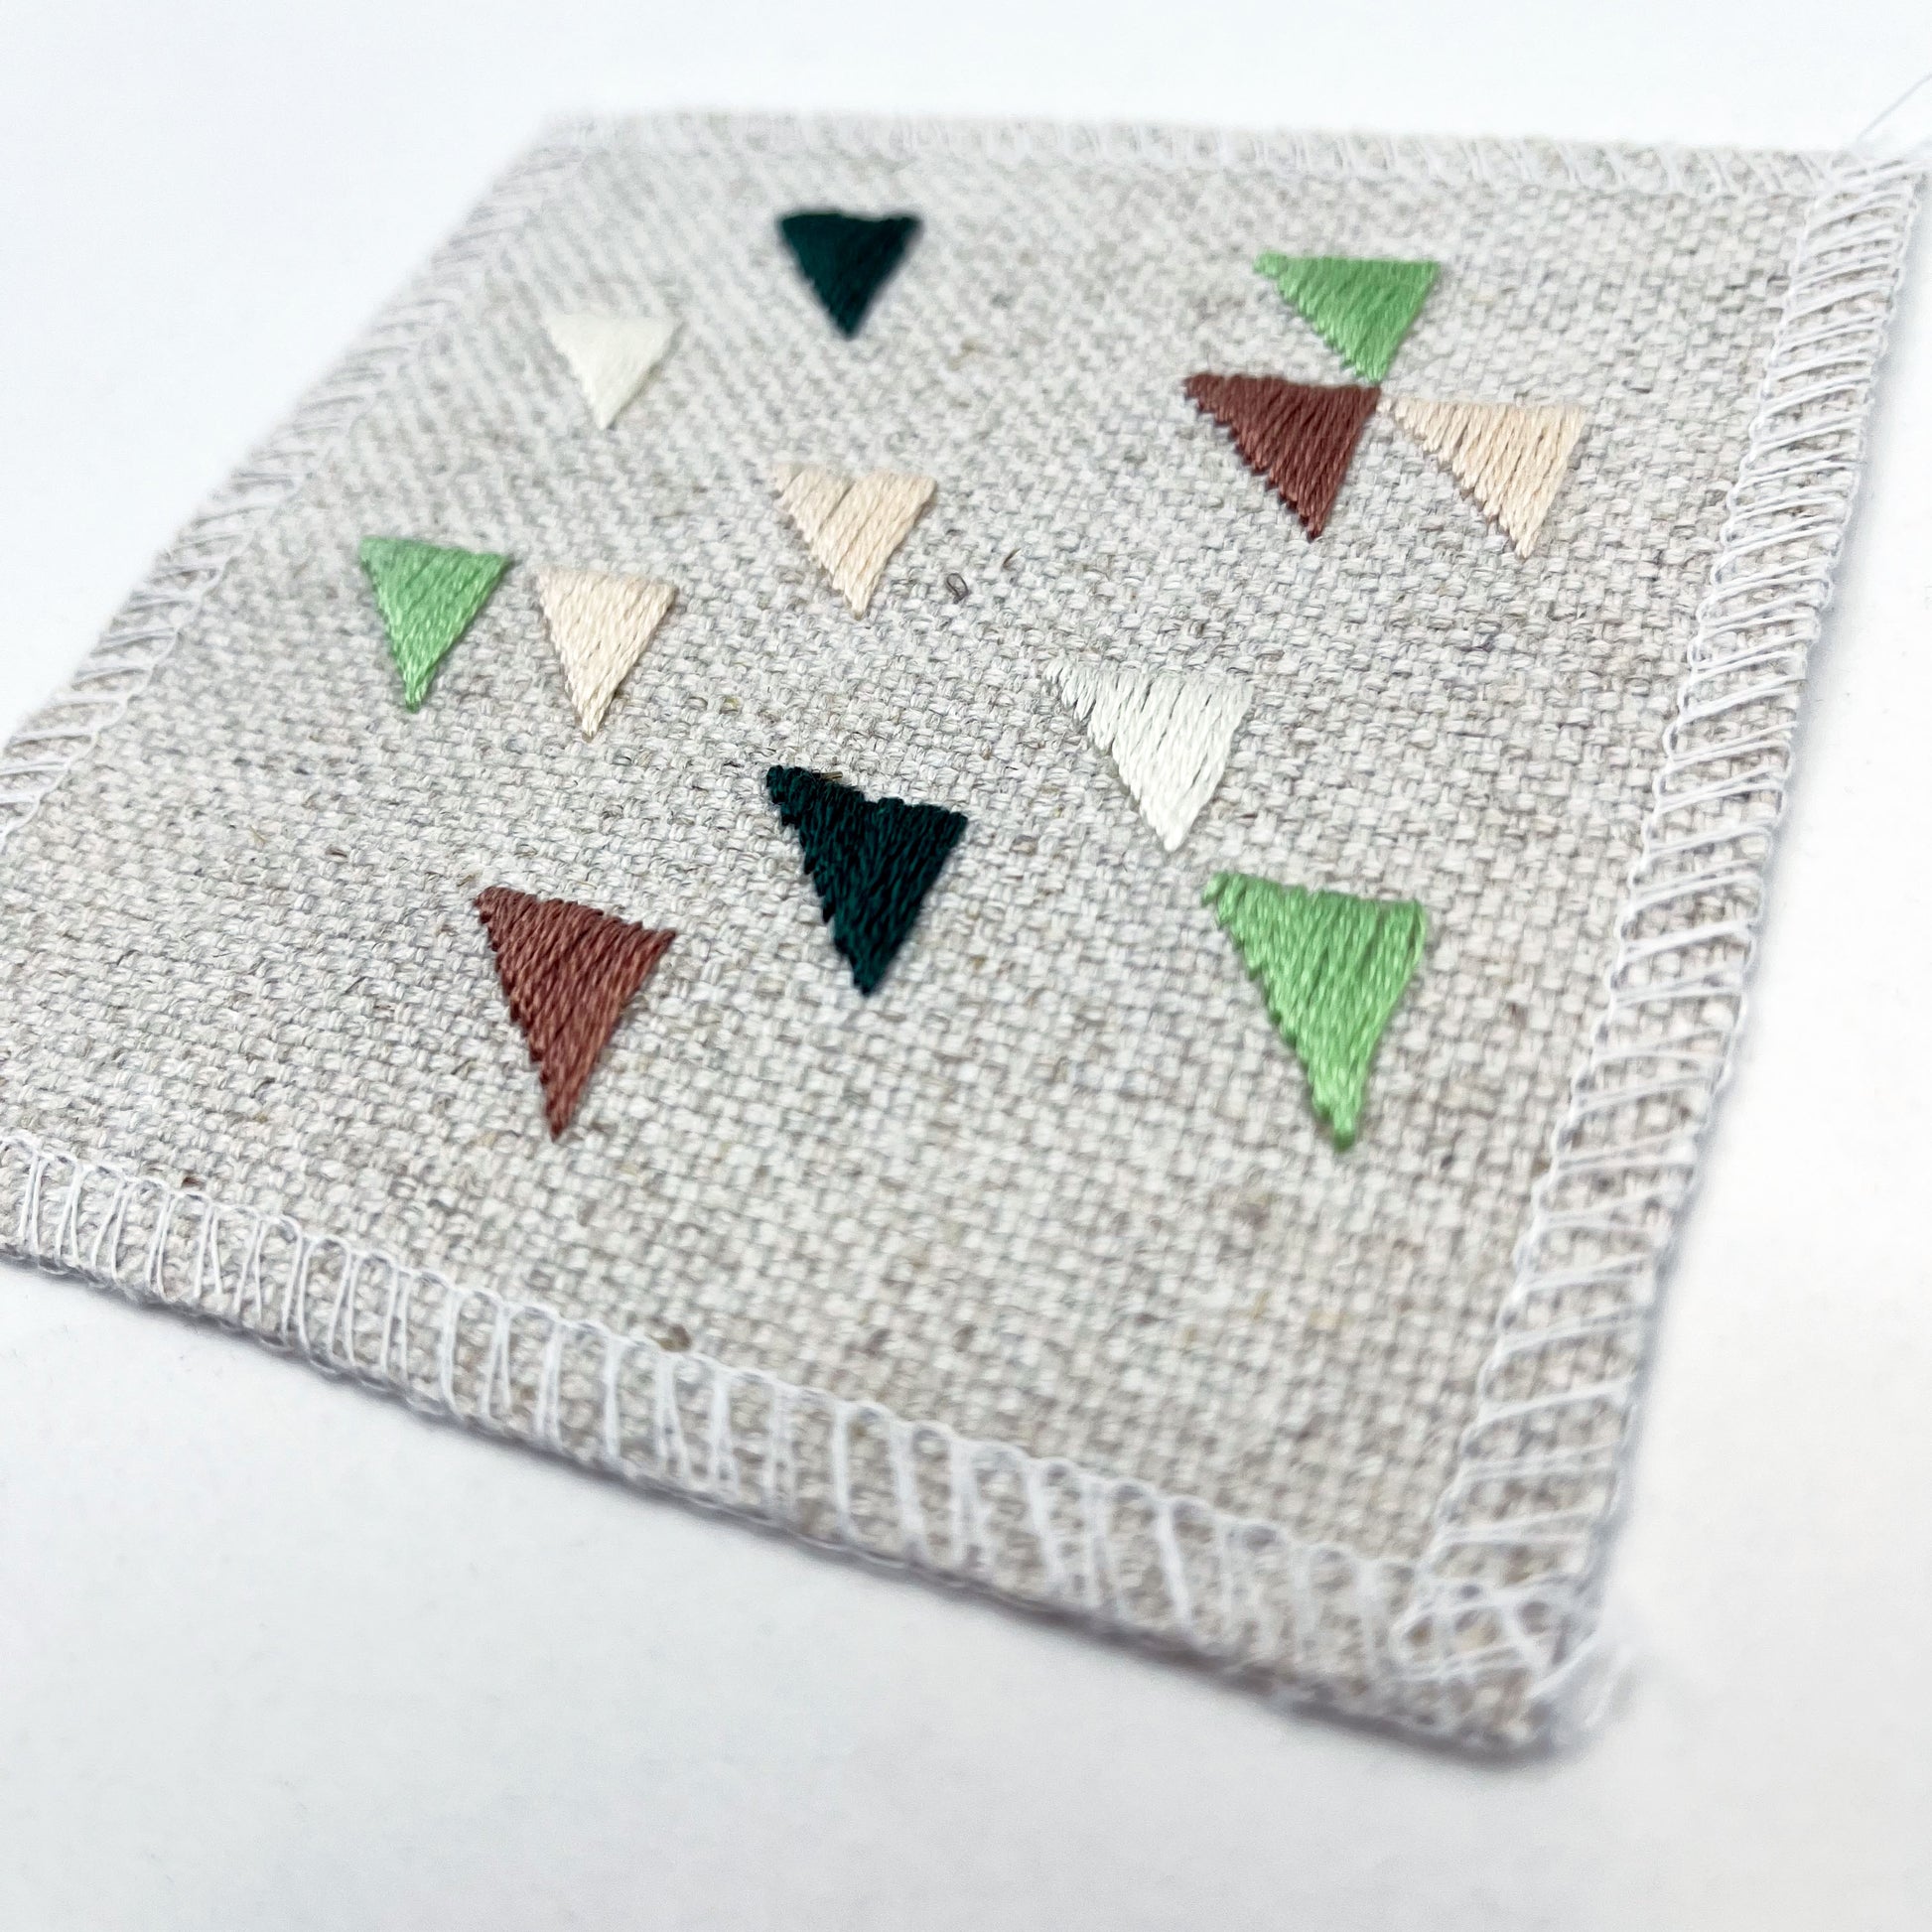 close up angled view of a square natural colored patch embroidered with randomly placed triangles in peaches, mauves and greens, on a white background